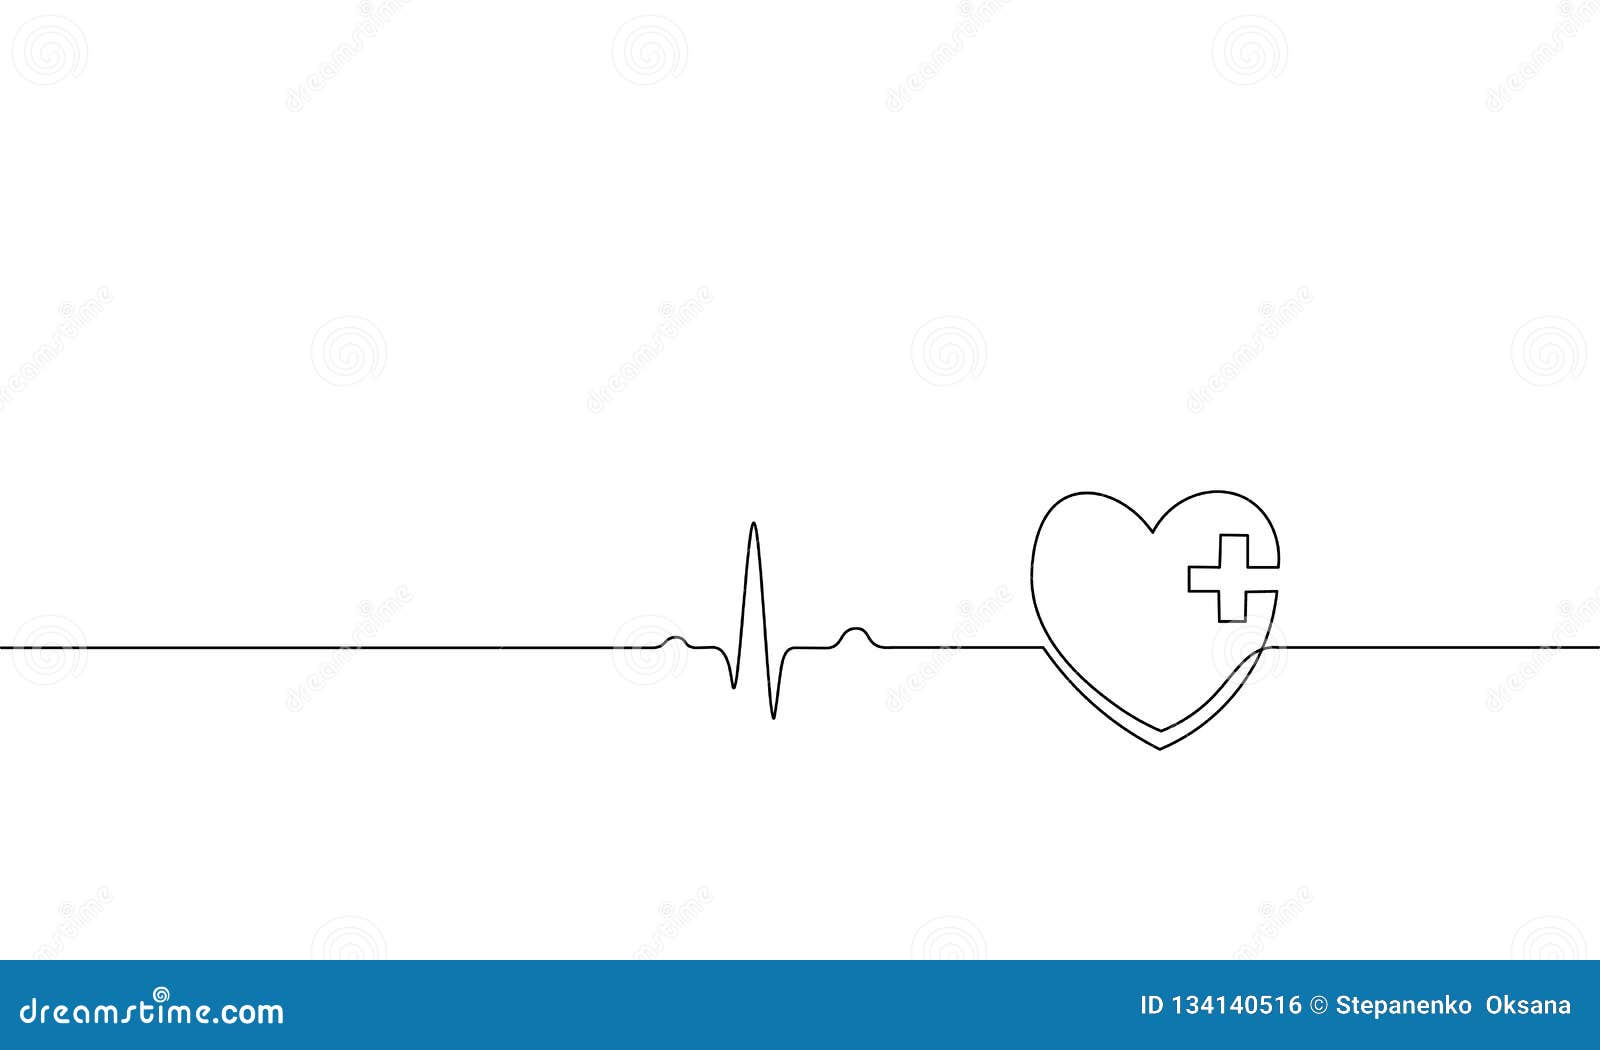 healthy heart beats pharmacy medicine single continuous line art. heartbeat pulse silhouette healthcare doctor online